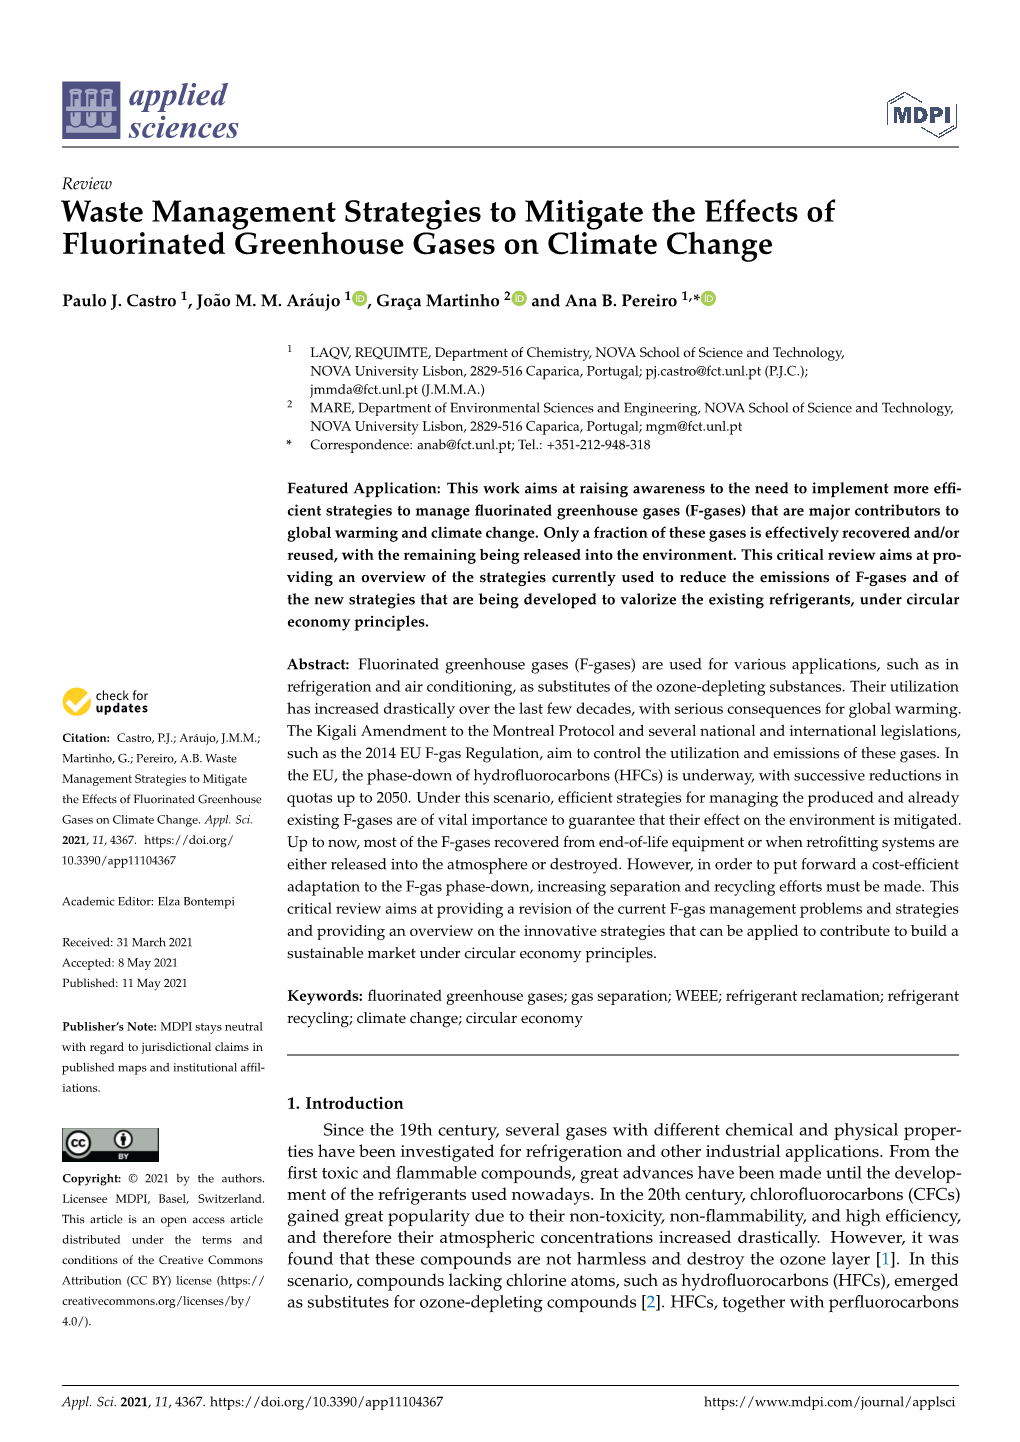 Waste Management Strategies to Mitigate the Effects of Fluorinated Greenhouse Gases on Climate Change